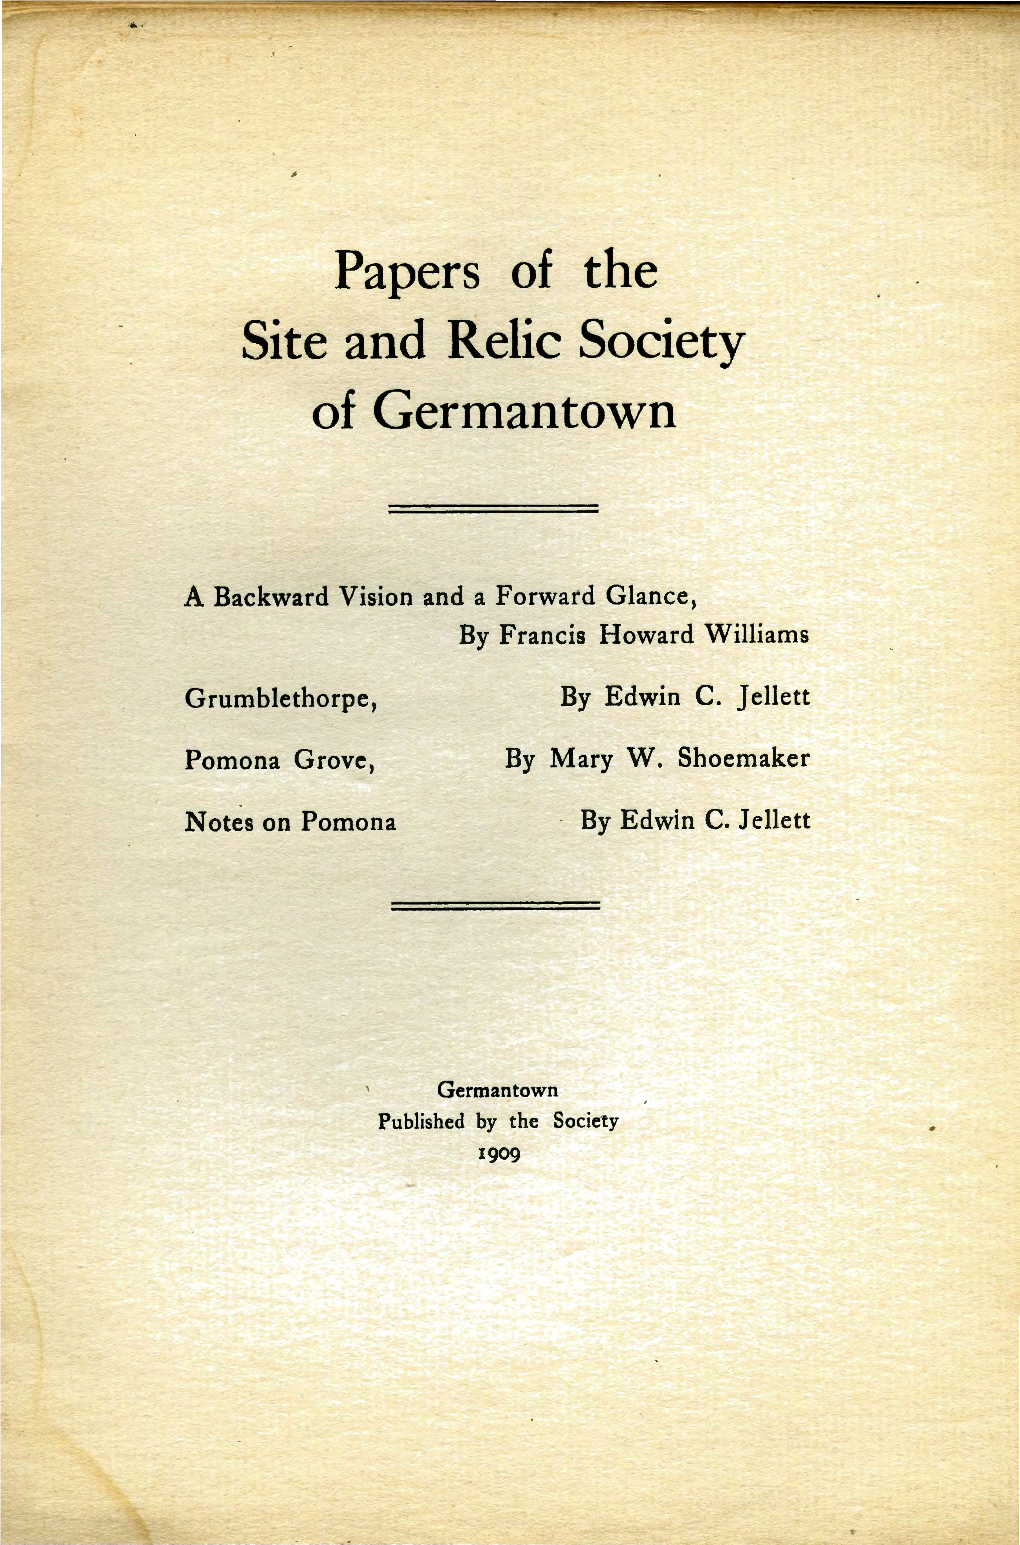 Papers of the Site and Relic Society of Germantown